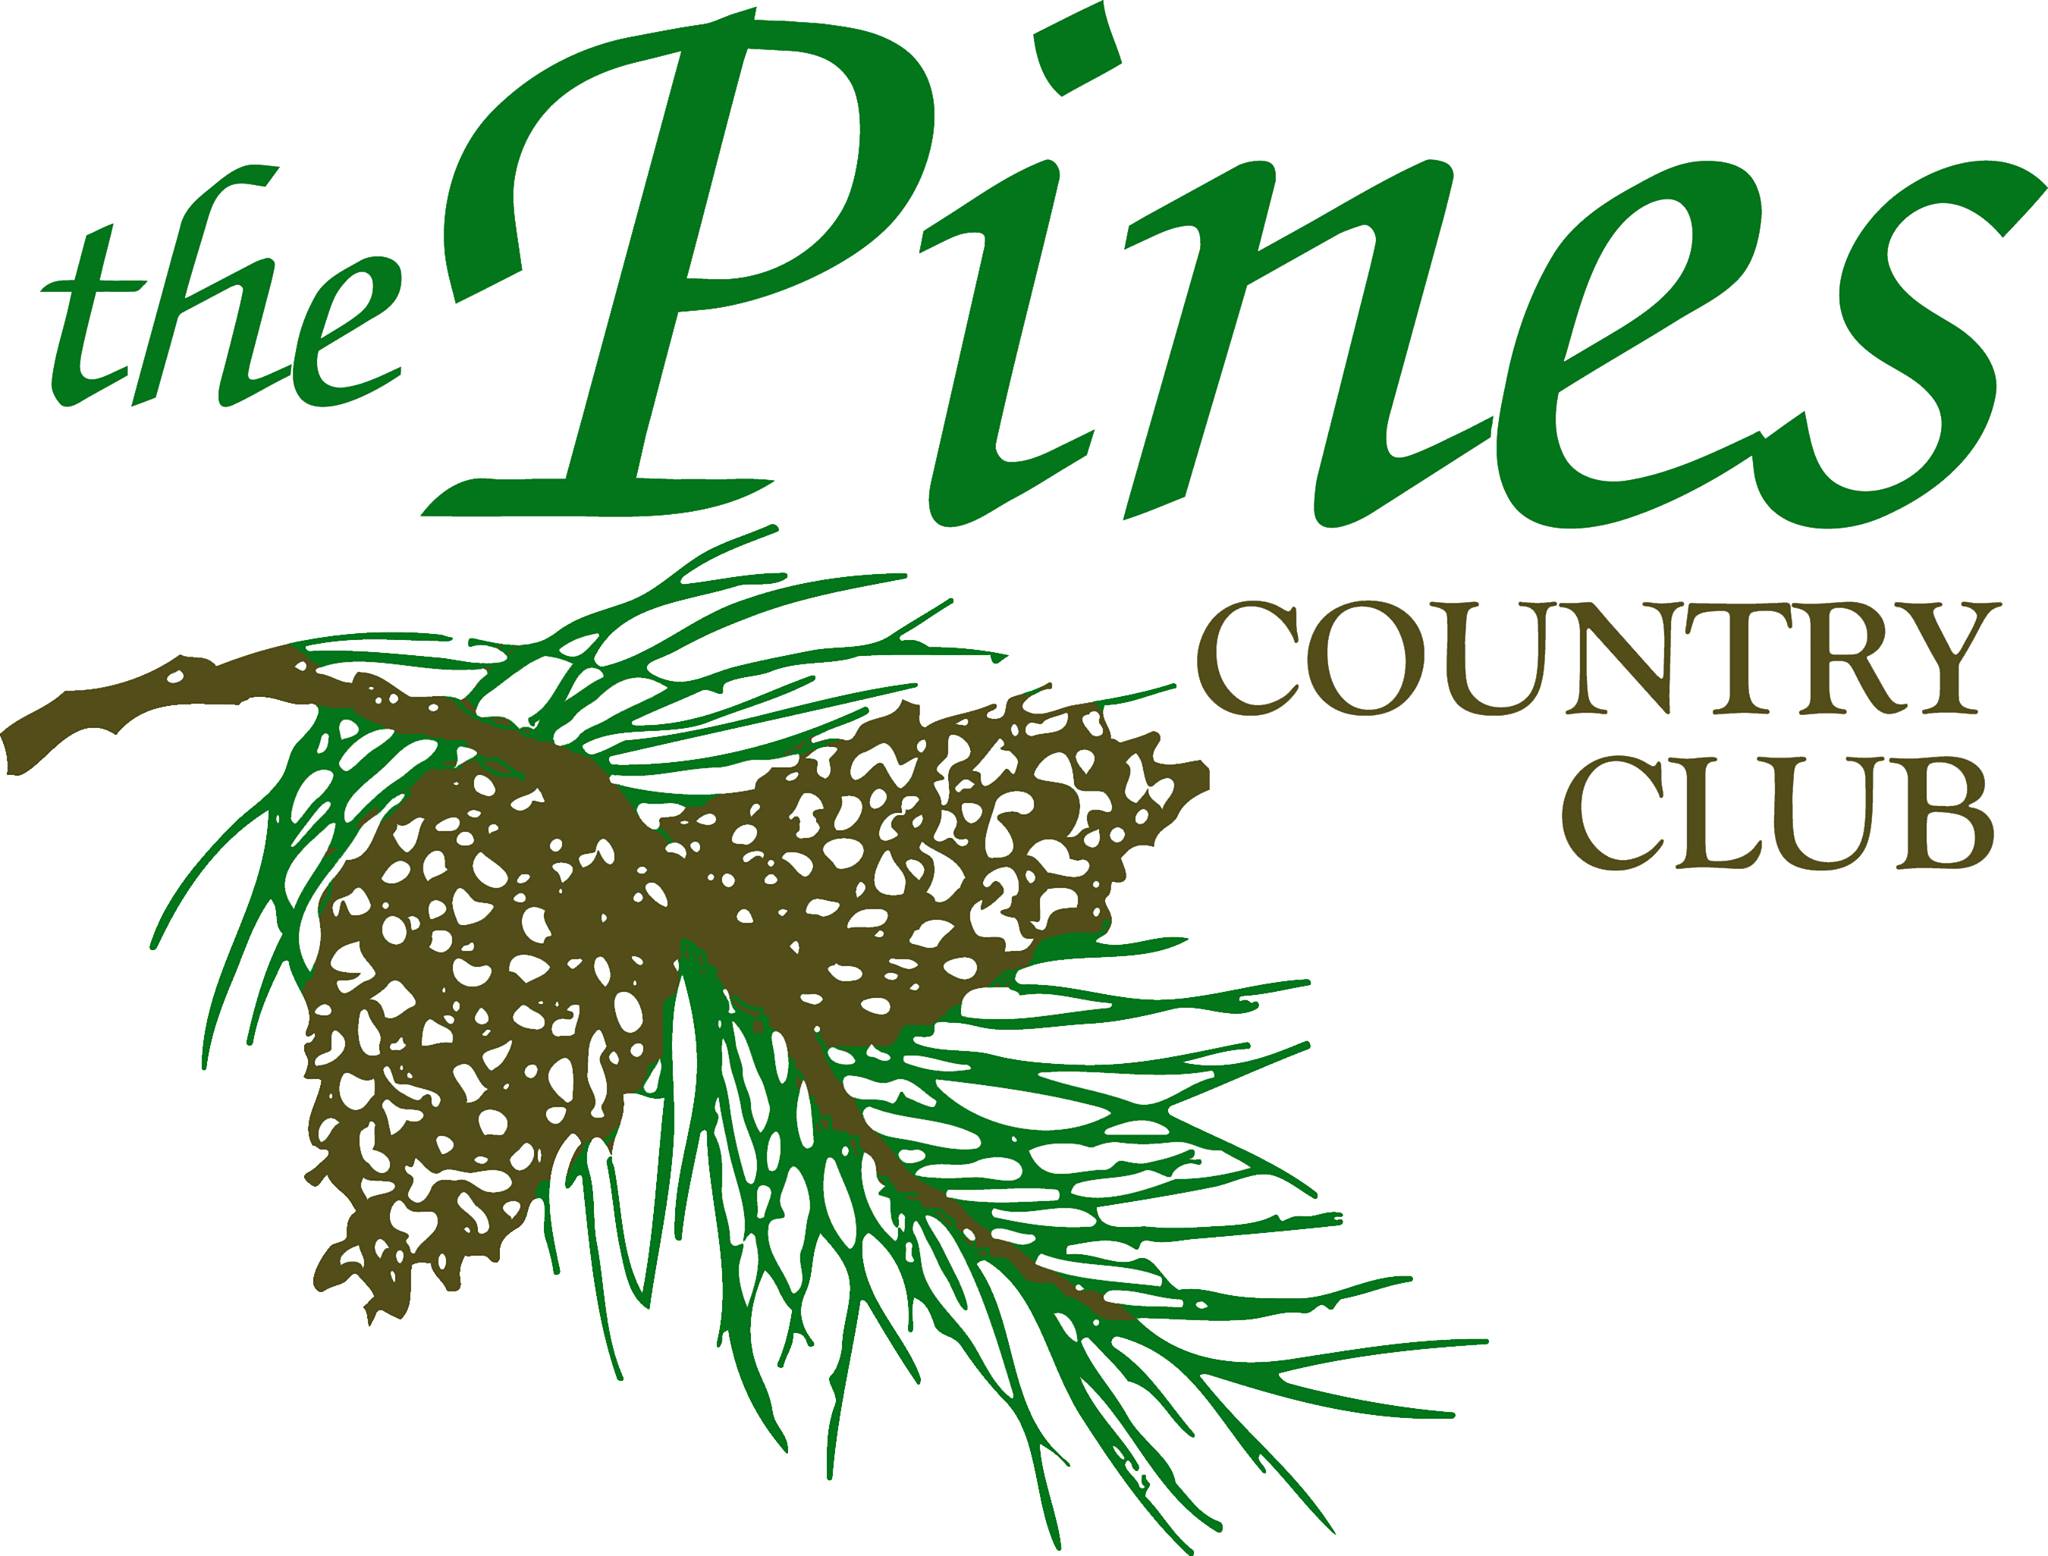 LocationTHE PINES COUNTRY CLUB